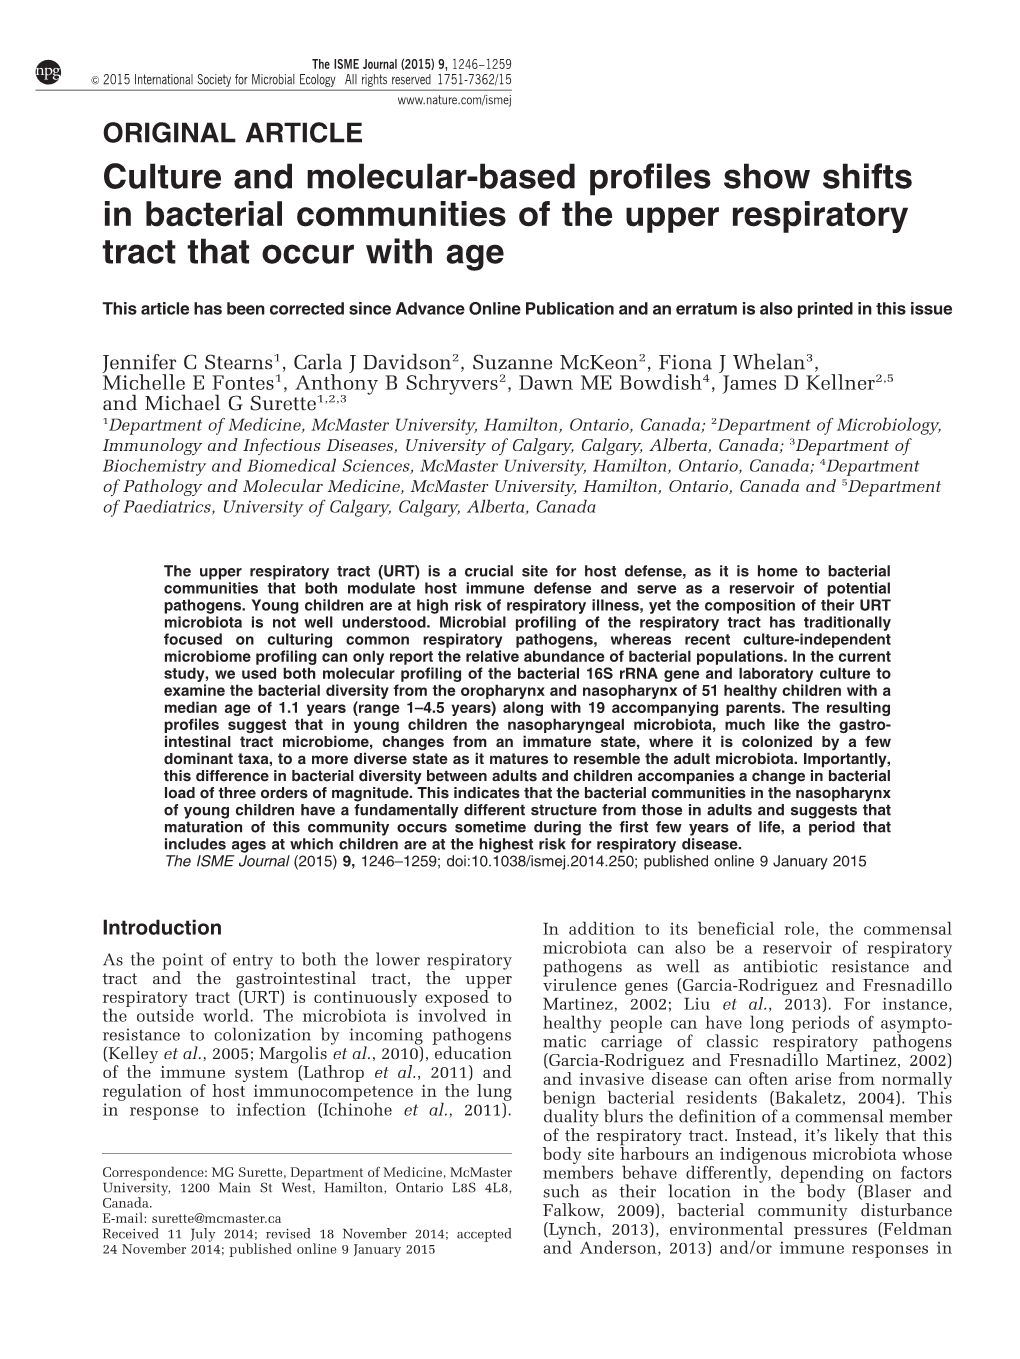 Culture and Molecular-Based Profiles Show Shifts in Bacterial Communities of the Upper Respiratory Tract That Occur with Age